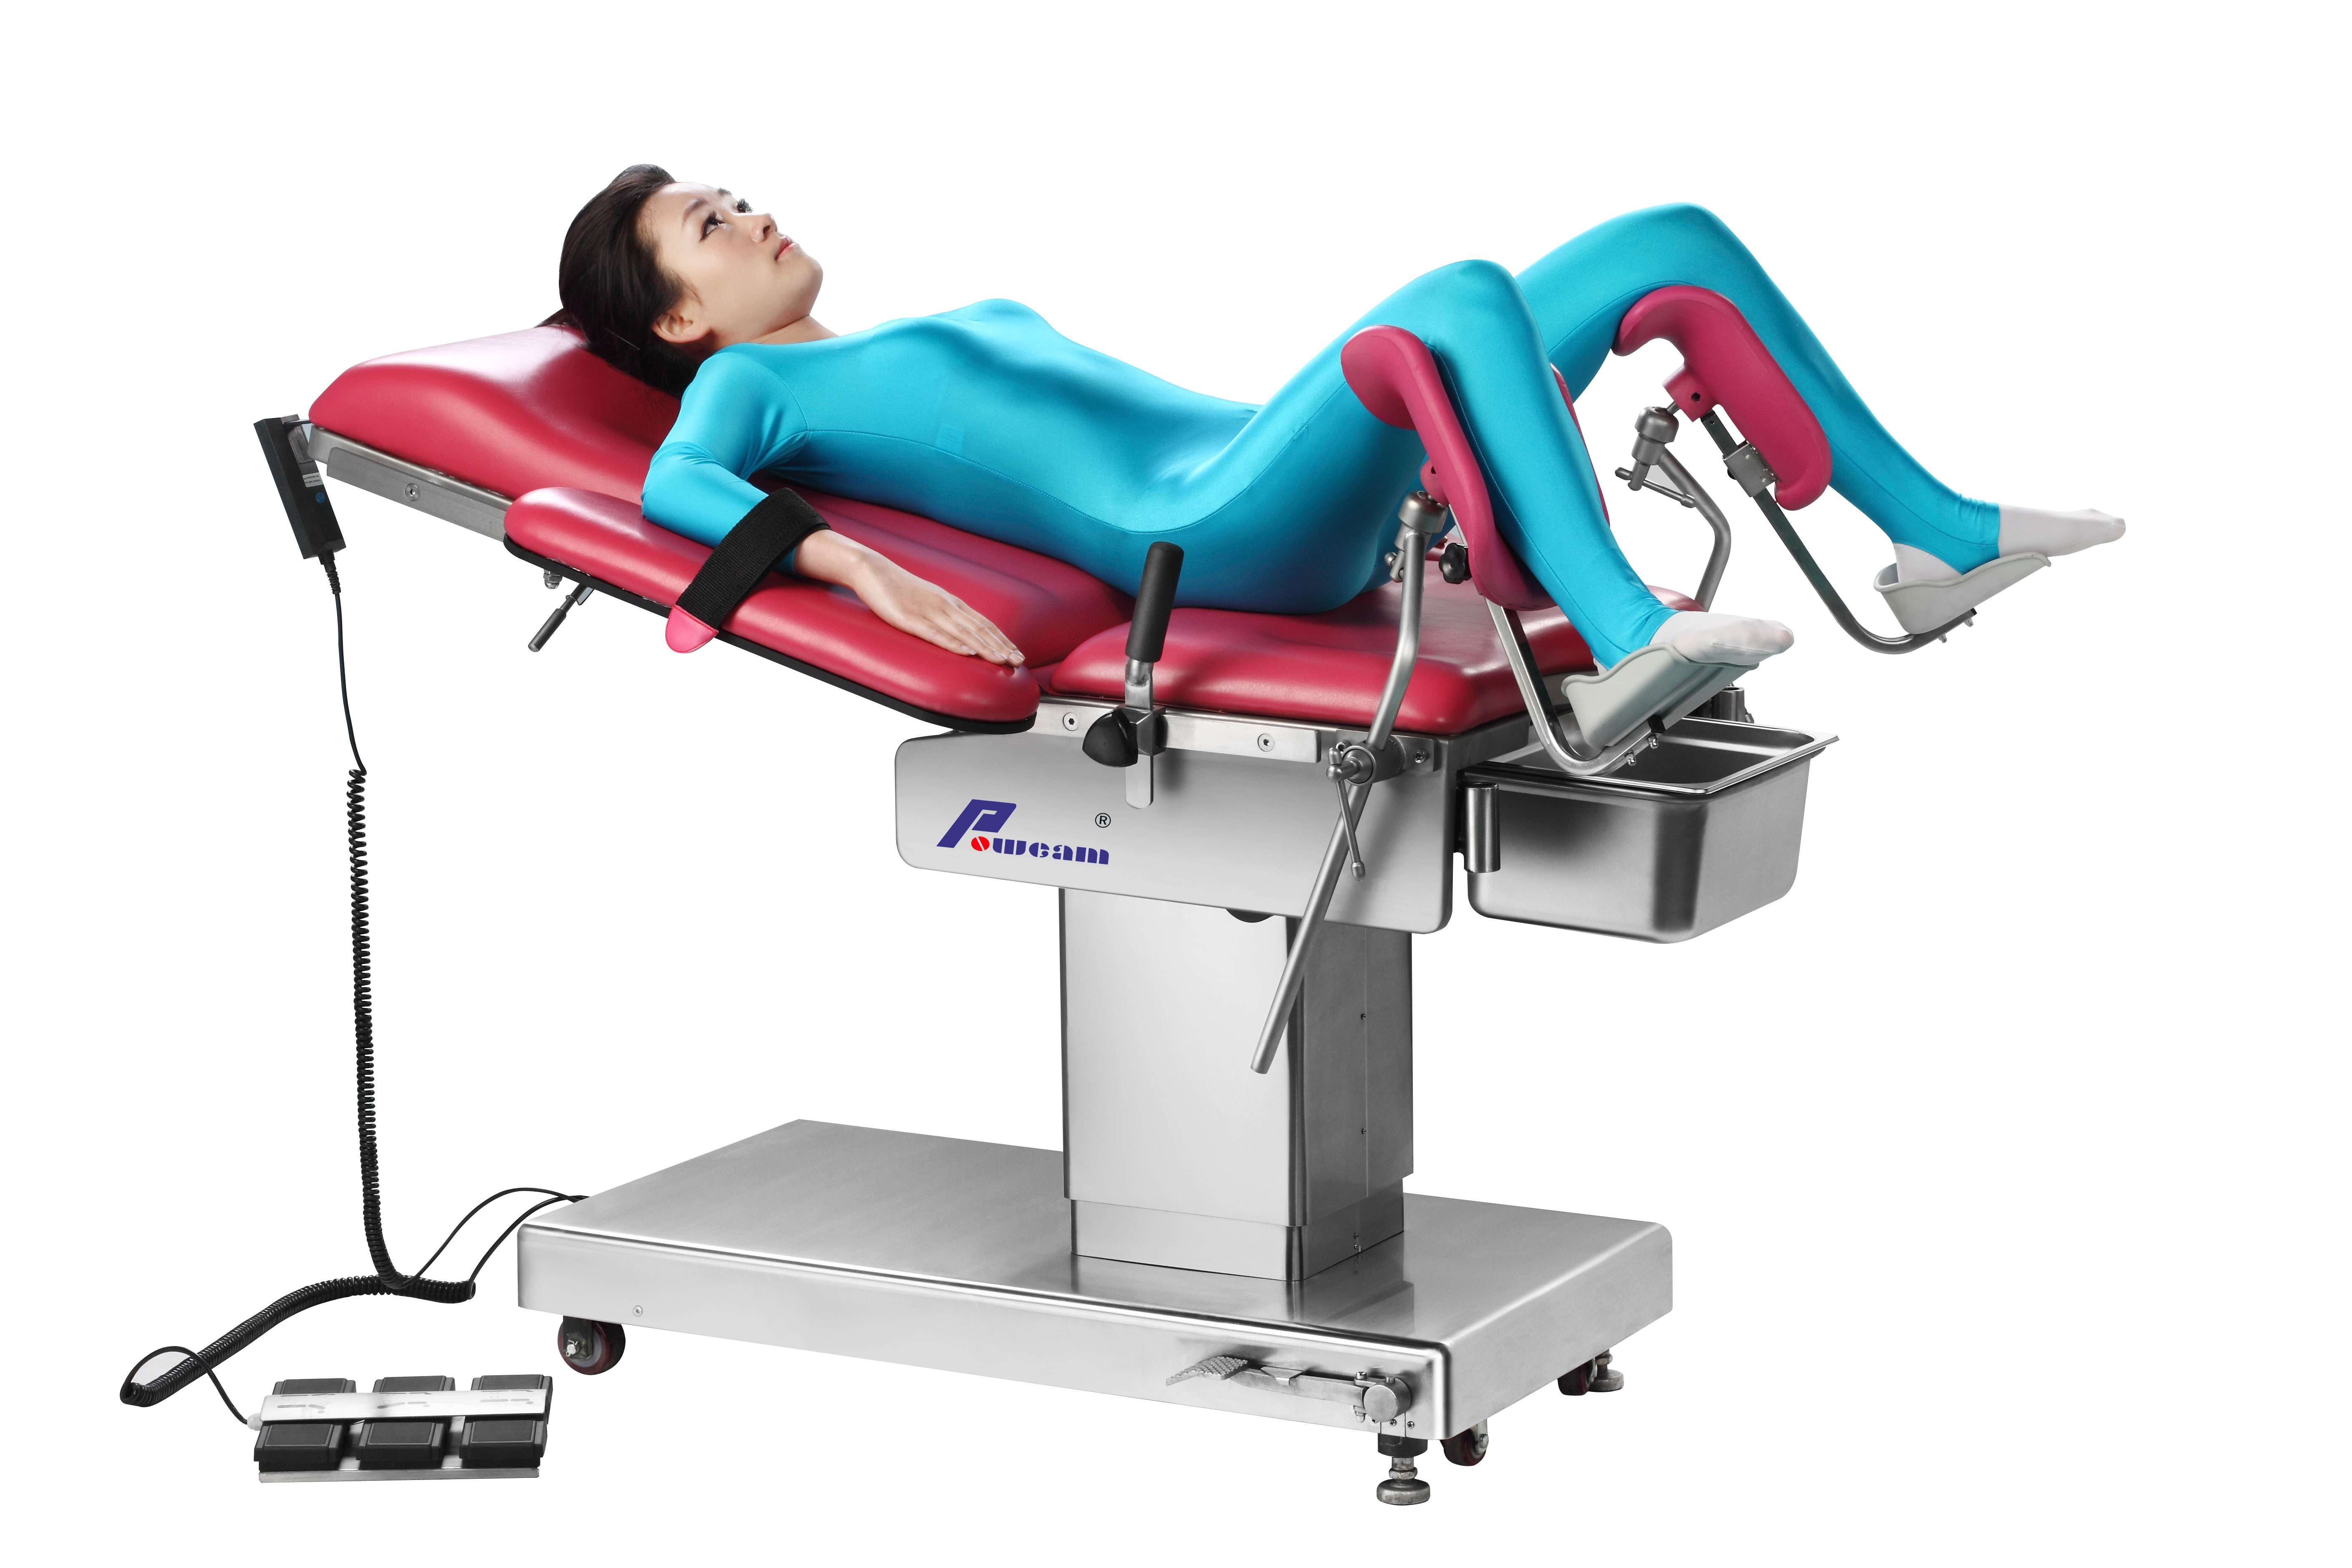 Electric Operating Table Gyn Exam Table Hb4000 From China Manufacturer Poweam Medical 